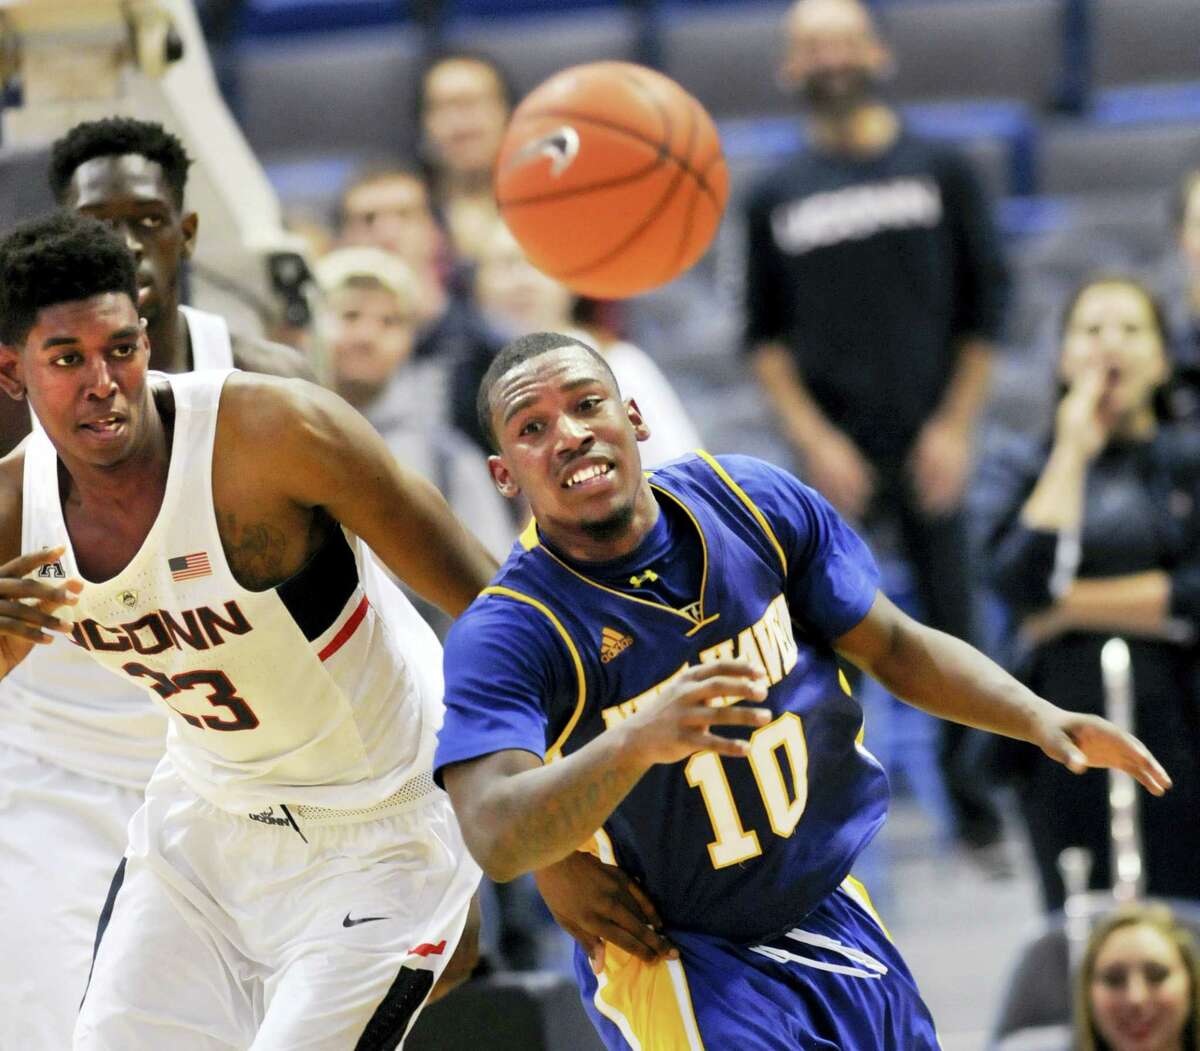 UConn’s Juwan Durham (23) chases a rebound with New Haven’s Danny Upchurch during the second half on Sunday.